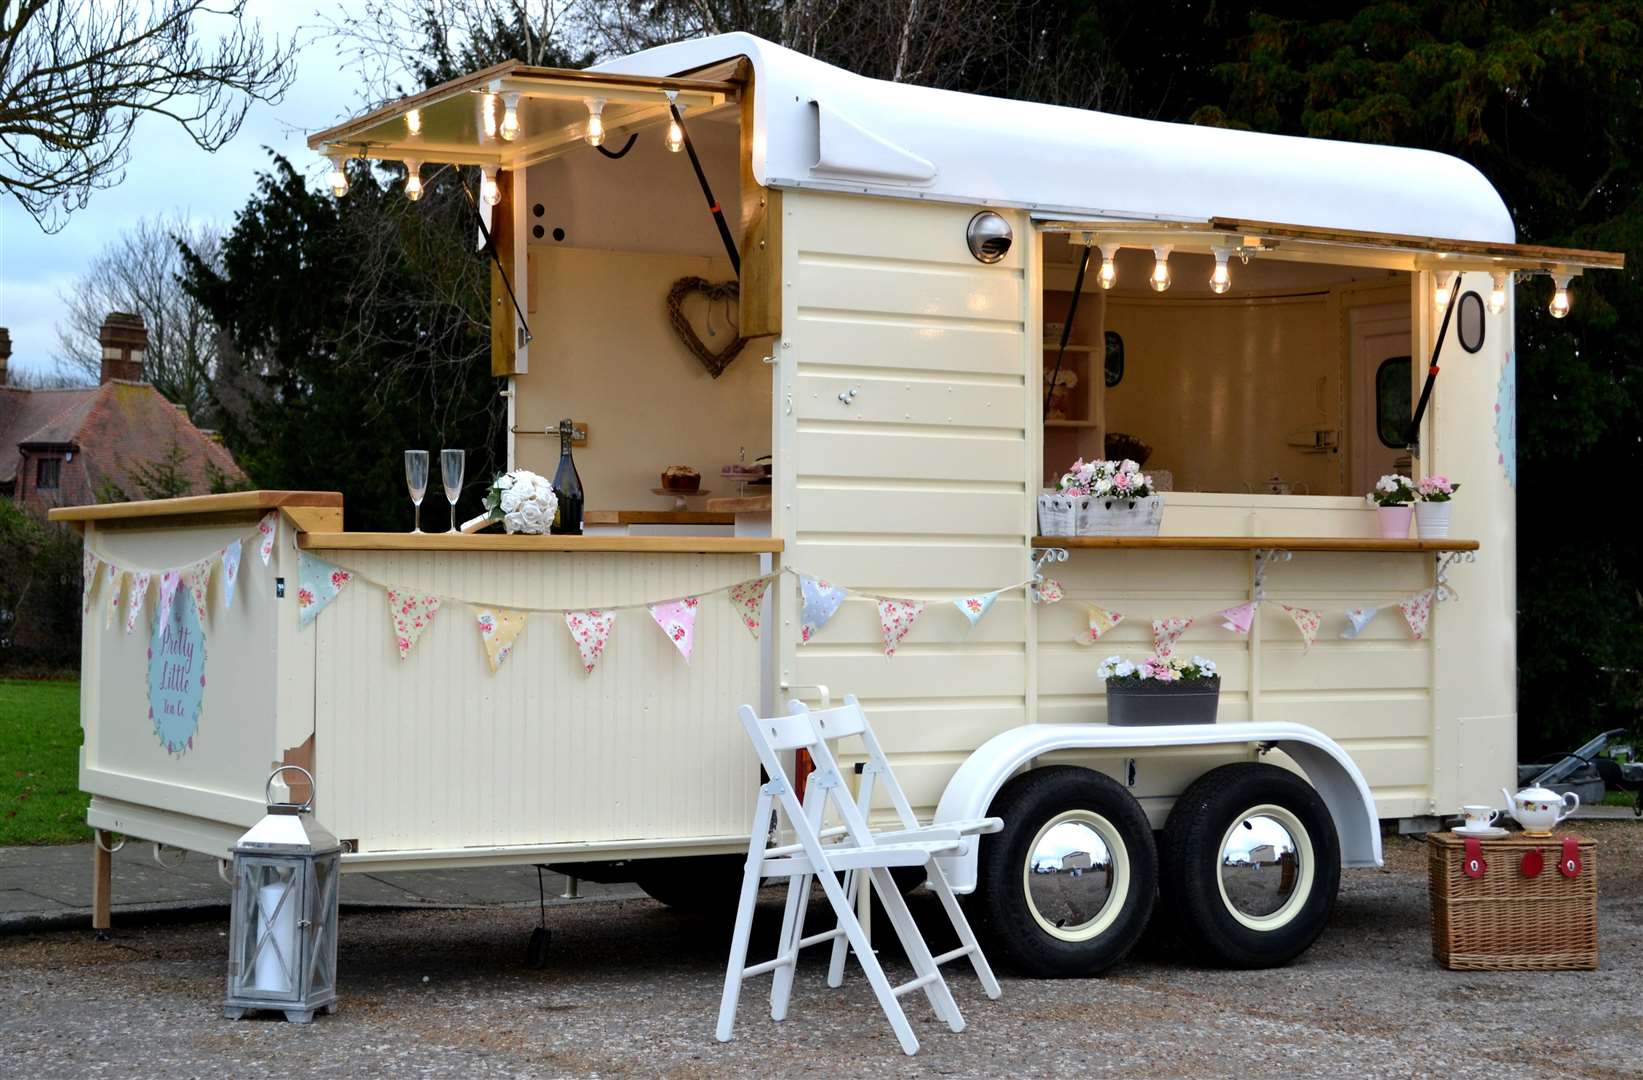 Sophie Dean and Sarah Moroney launched Pretty Little Tea Co. from a converted horsebox